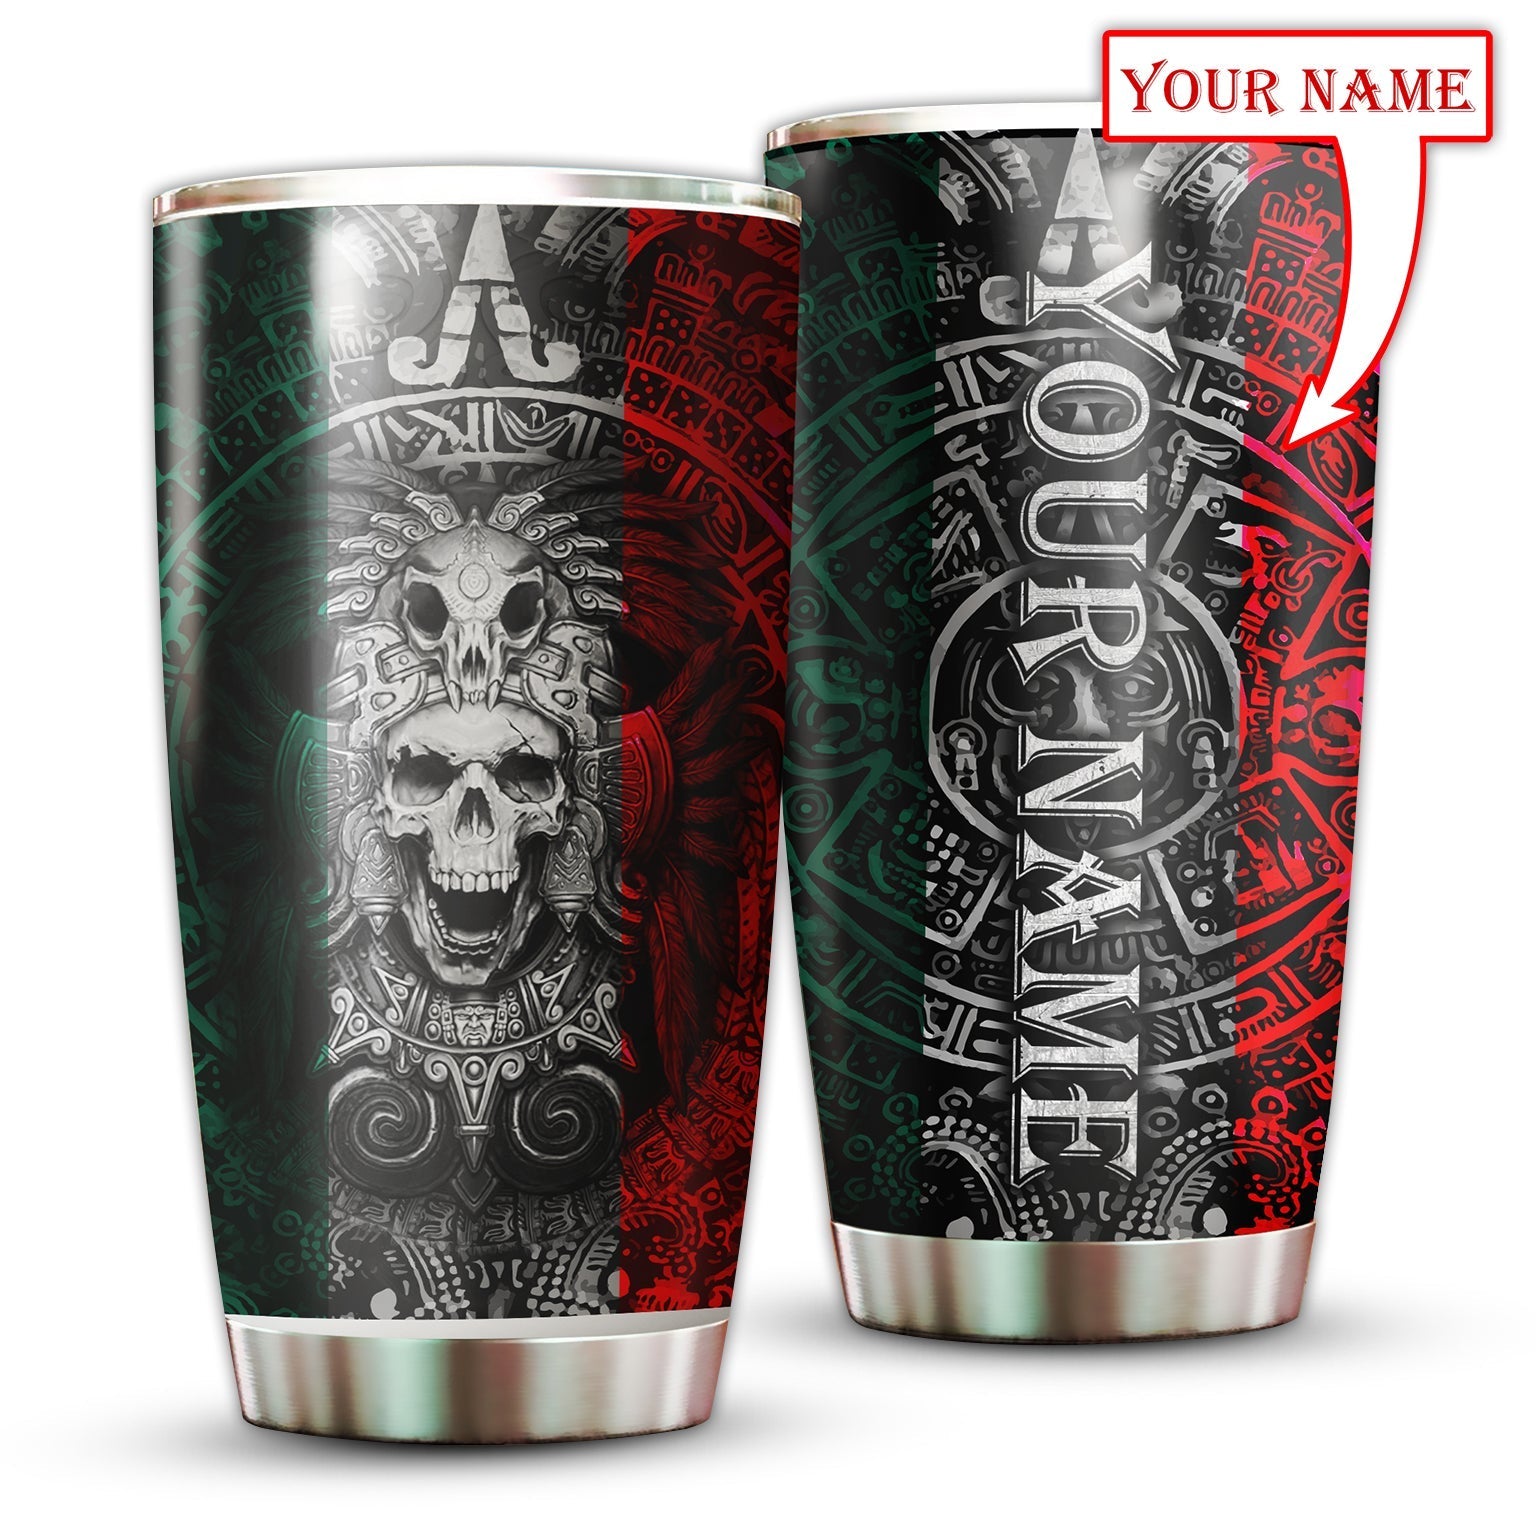 aztec-mexico-with-black-red-and-white-personalized-tumbler